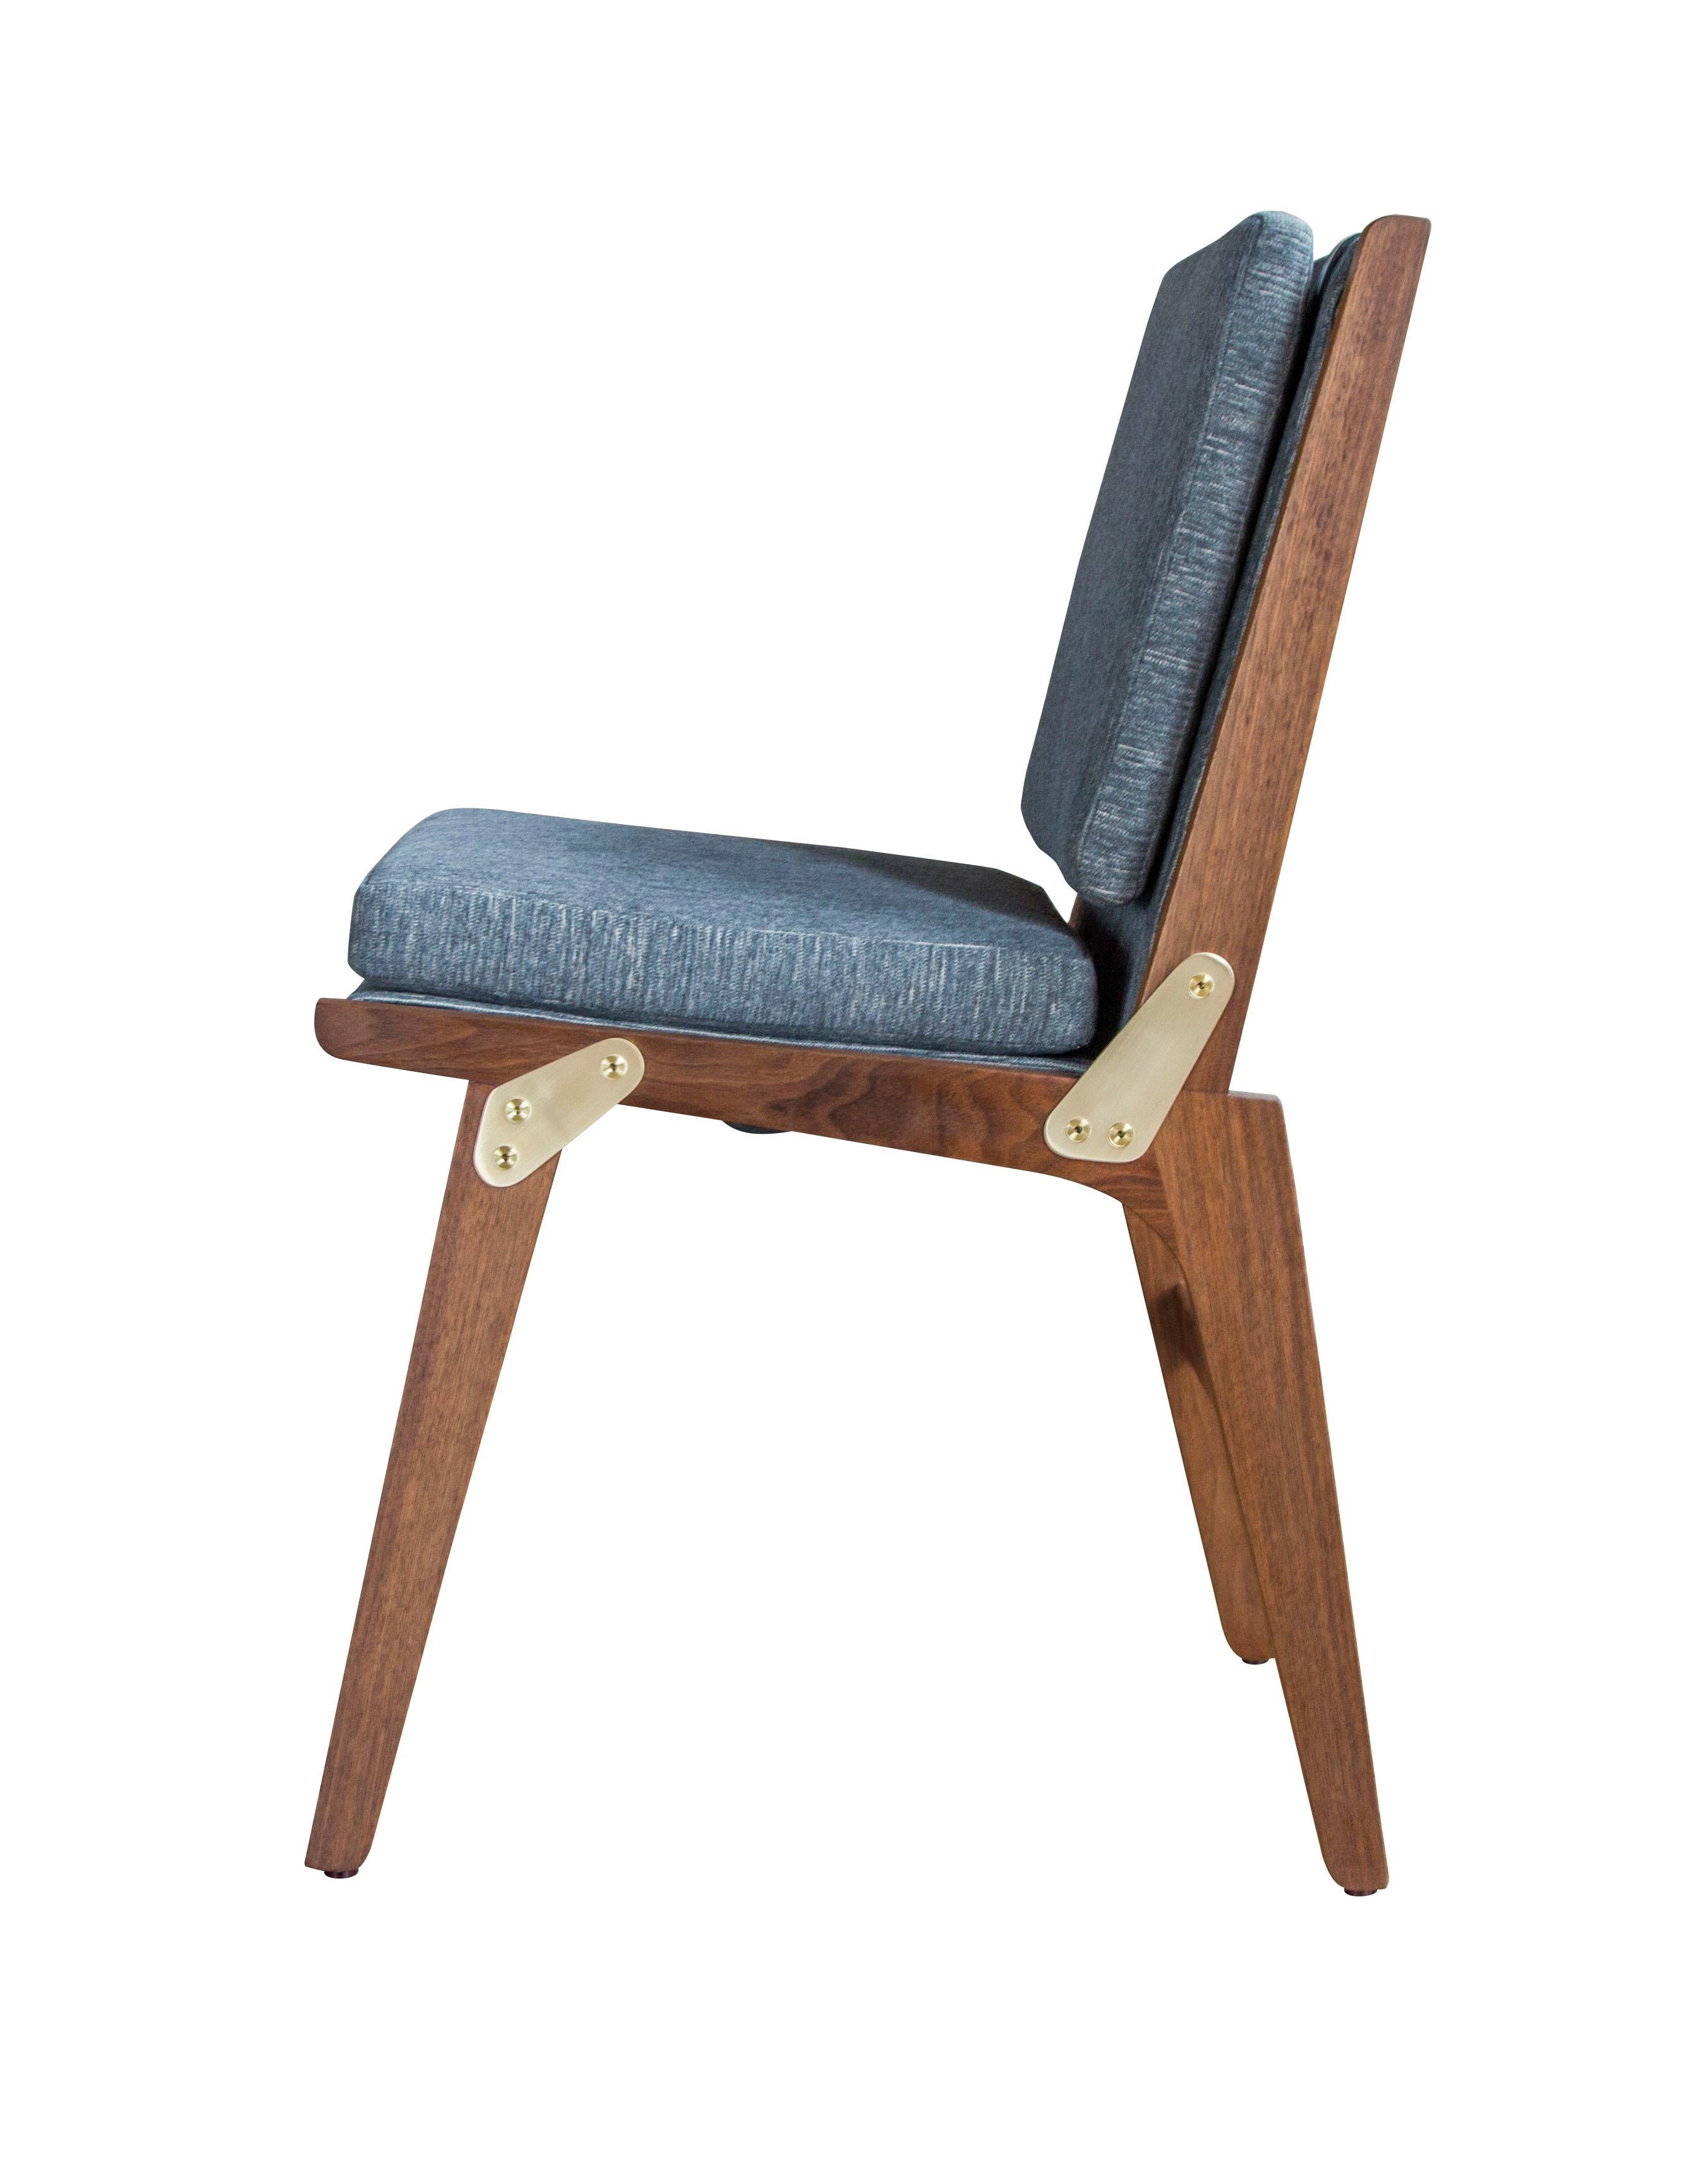 Modern O.F.S. Dining Chair in Oiled Walnut - handcrafted by Richard Wrightman Design